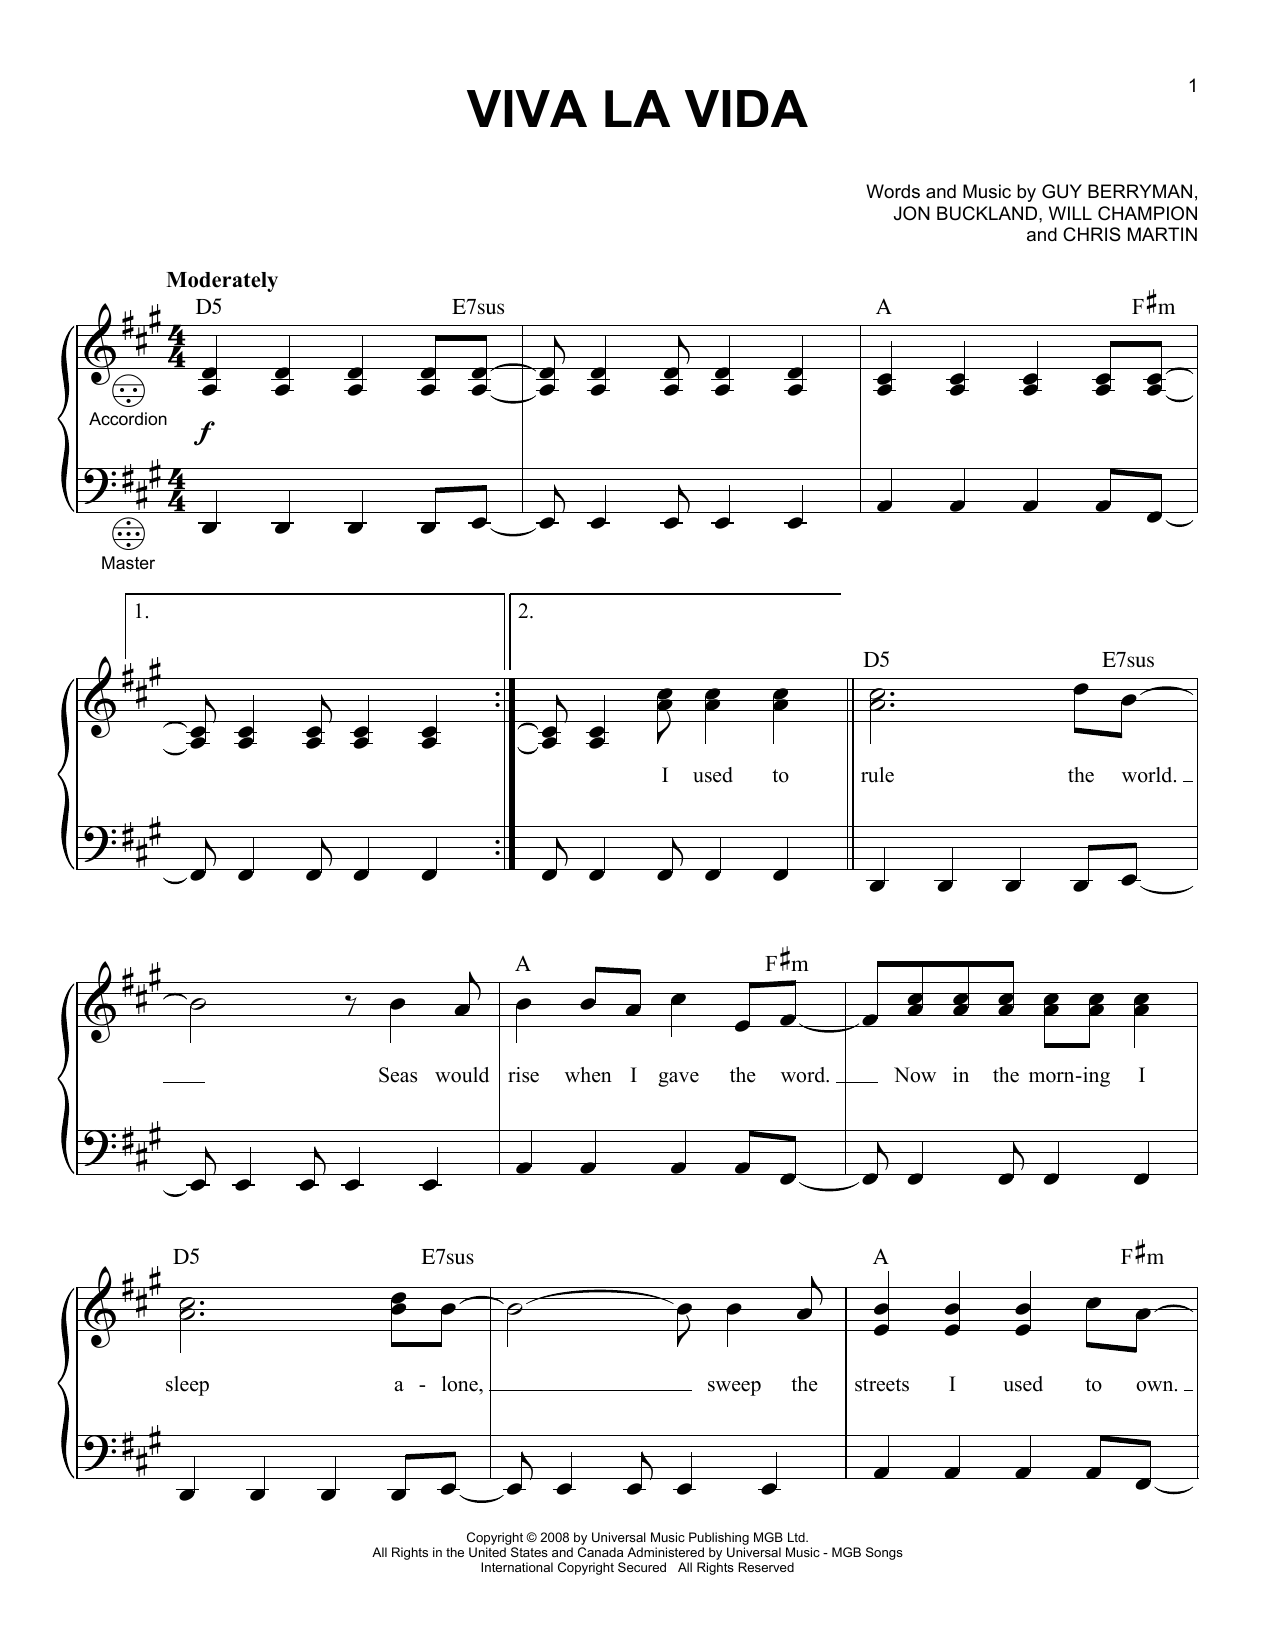 Coldplay Viva La Vida sheet music preview music notes and score for Piano, Vocal & Guitar including 6 page(s)